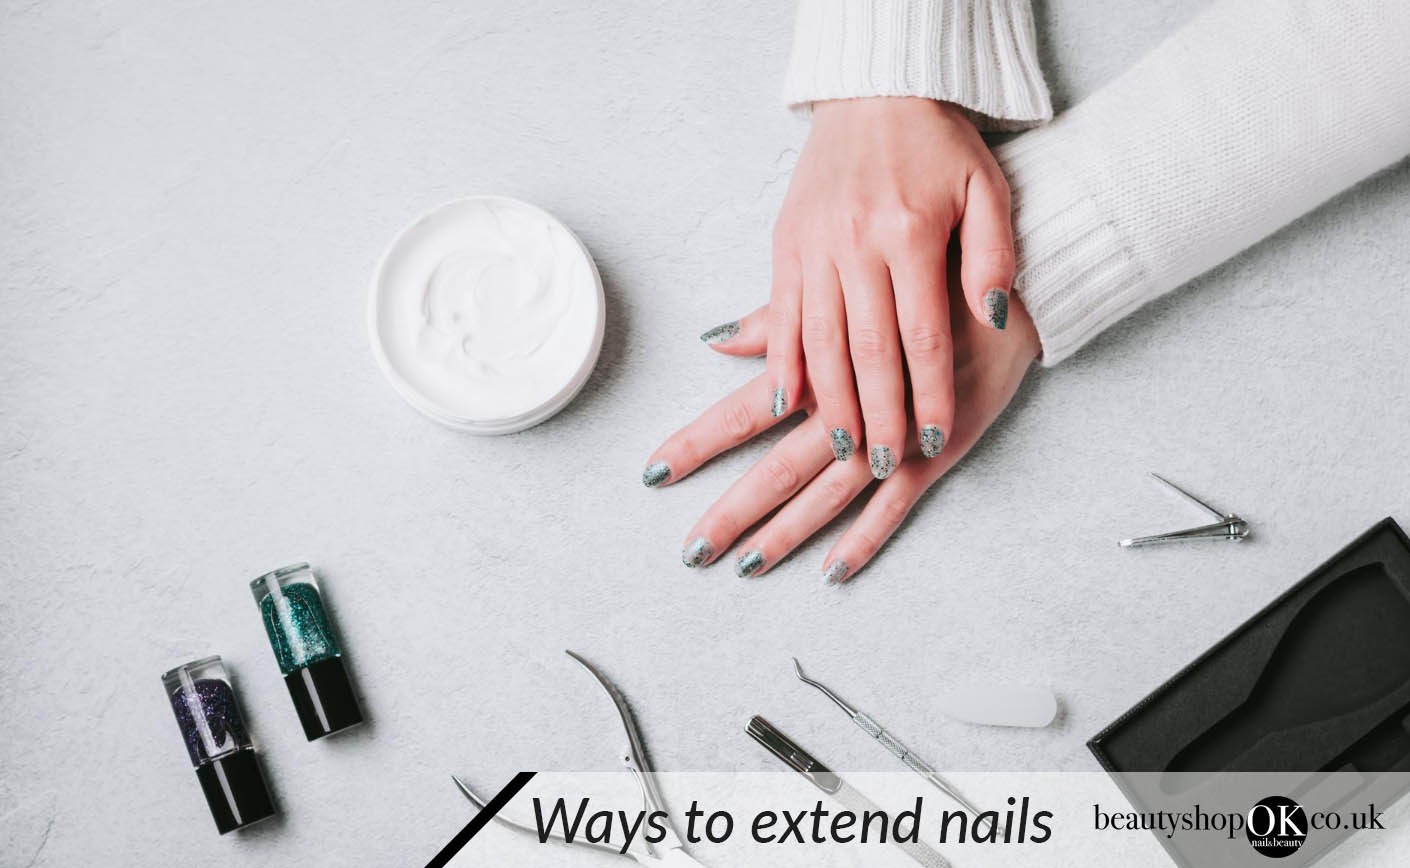 Ways to extend nails – which is the best?